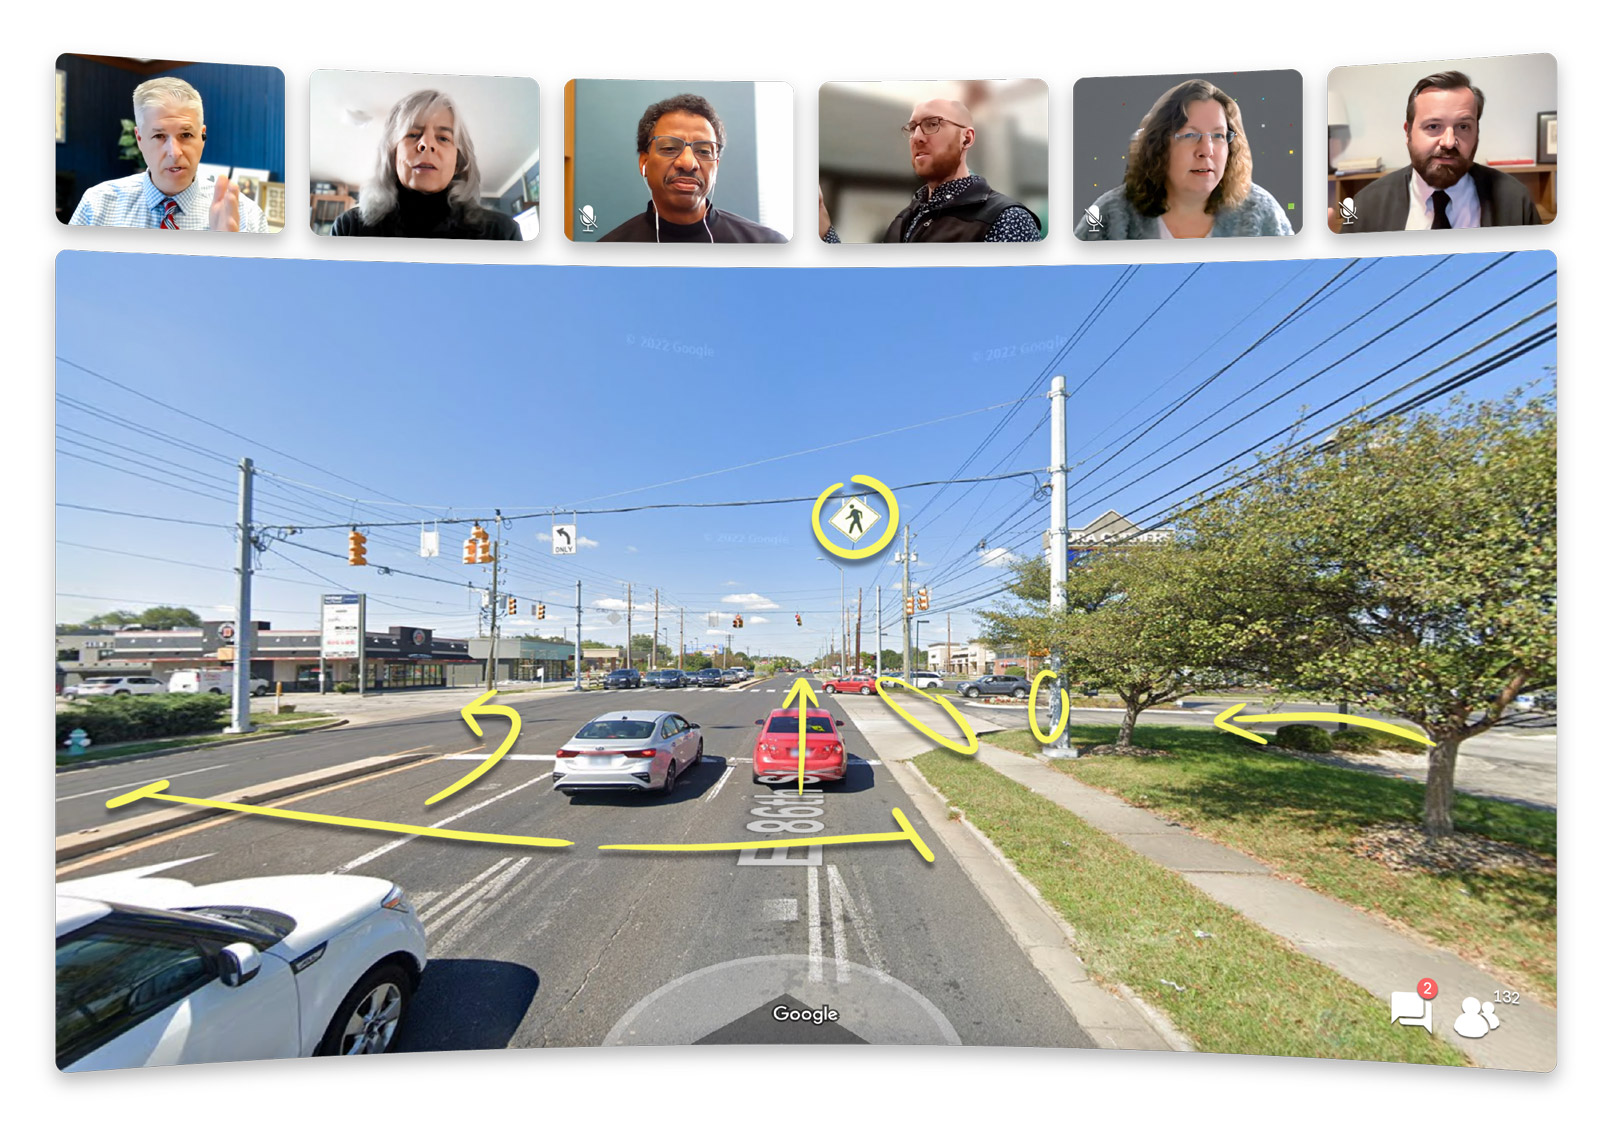 Six street safety experts and analysts on a video call discussing a dangerous intersection.